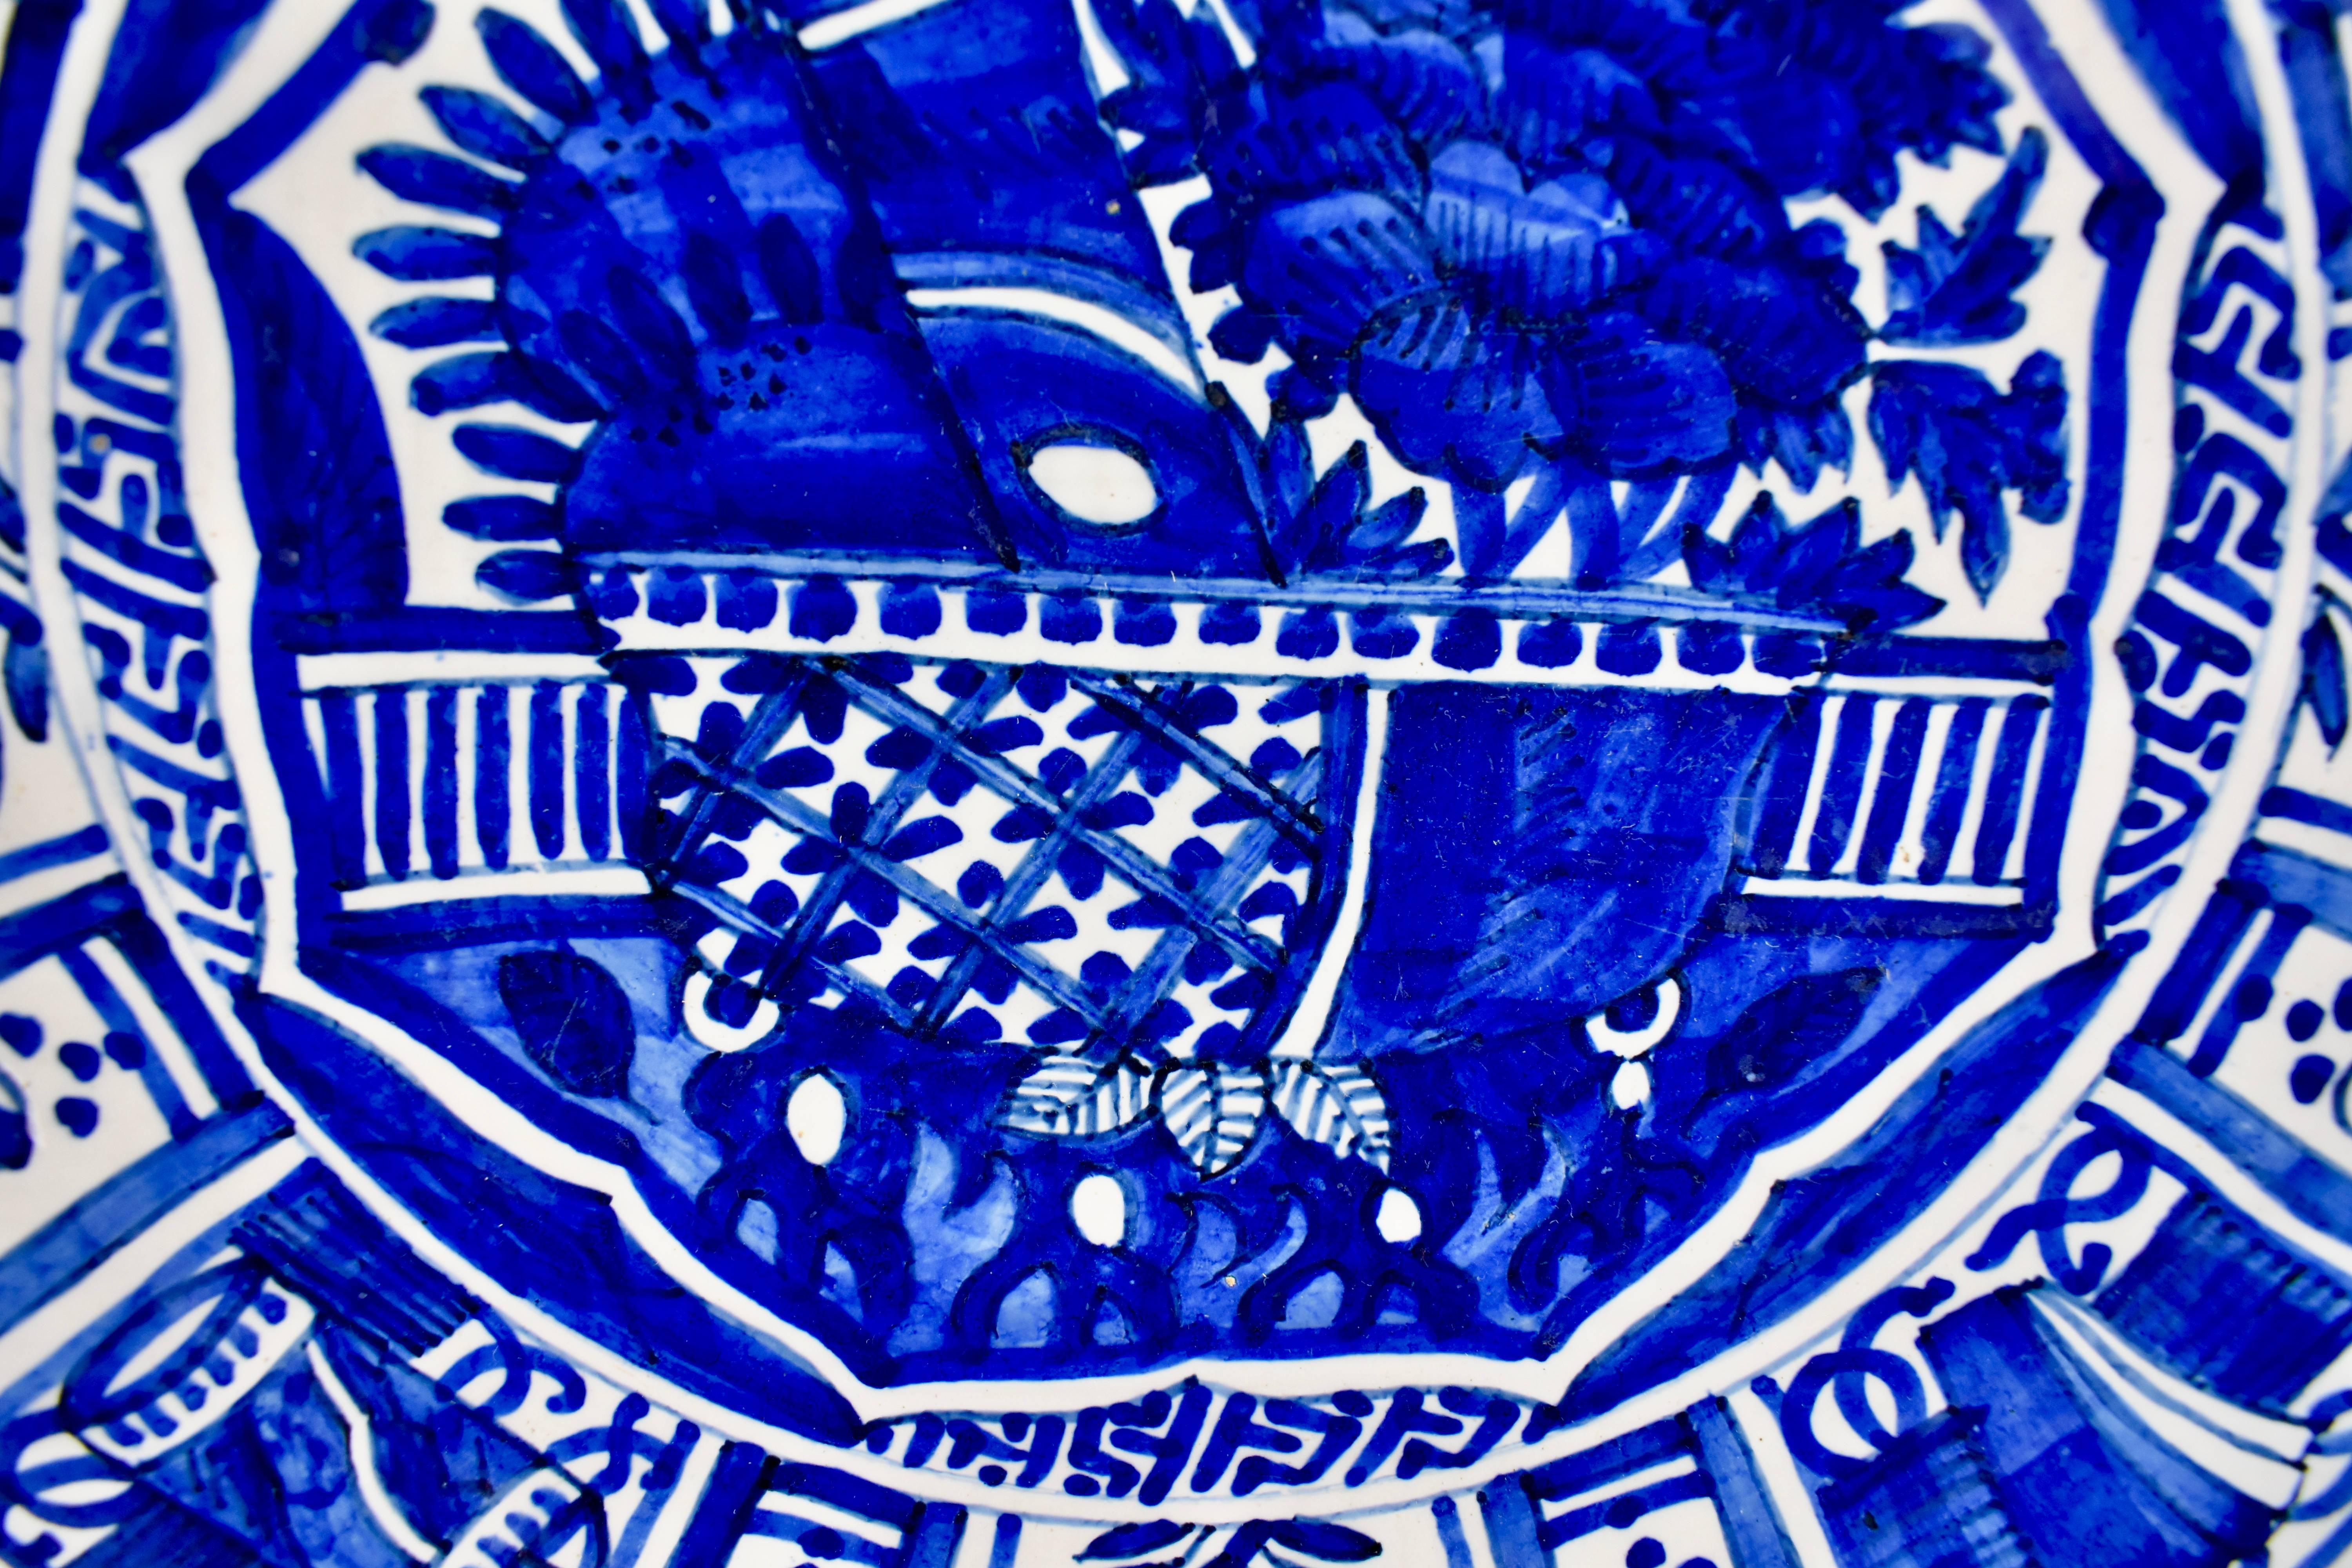 An 18th century Dutch delft, tin-glazed earthenware deep charger, inspired by Chinese export porcelain and hand-painted in a heavy cobalt blue geometric and floral pattern. A stylized border of a daisy like flower alternating with a geometric